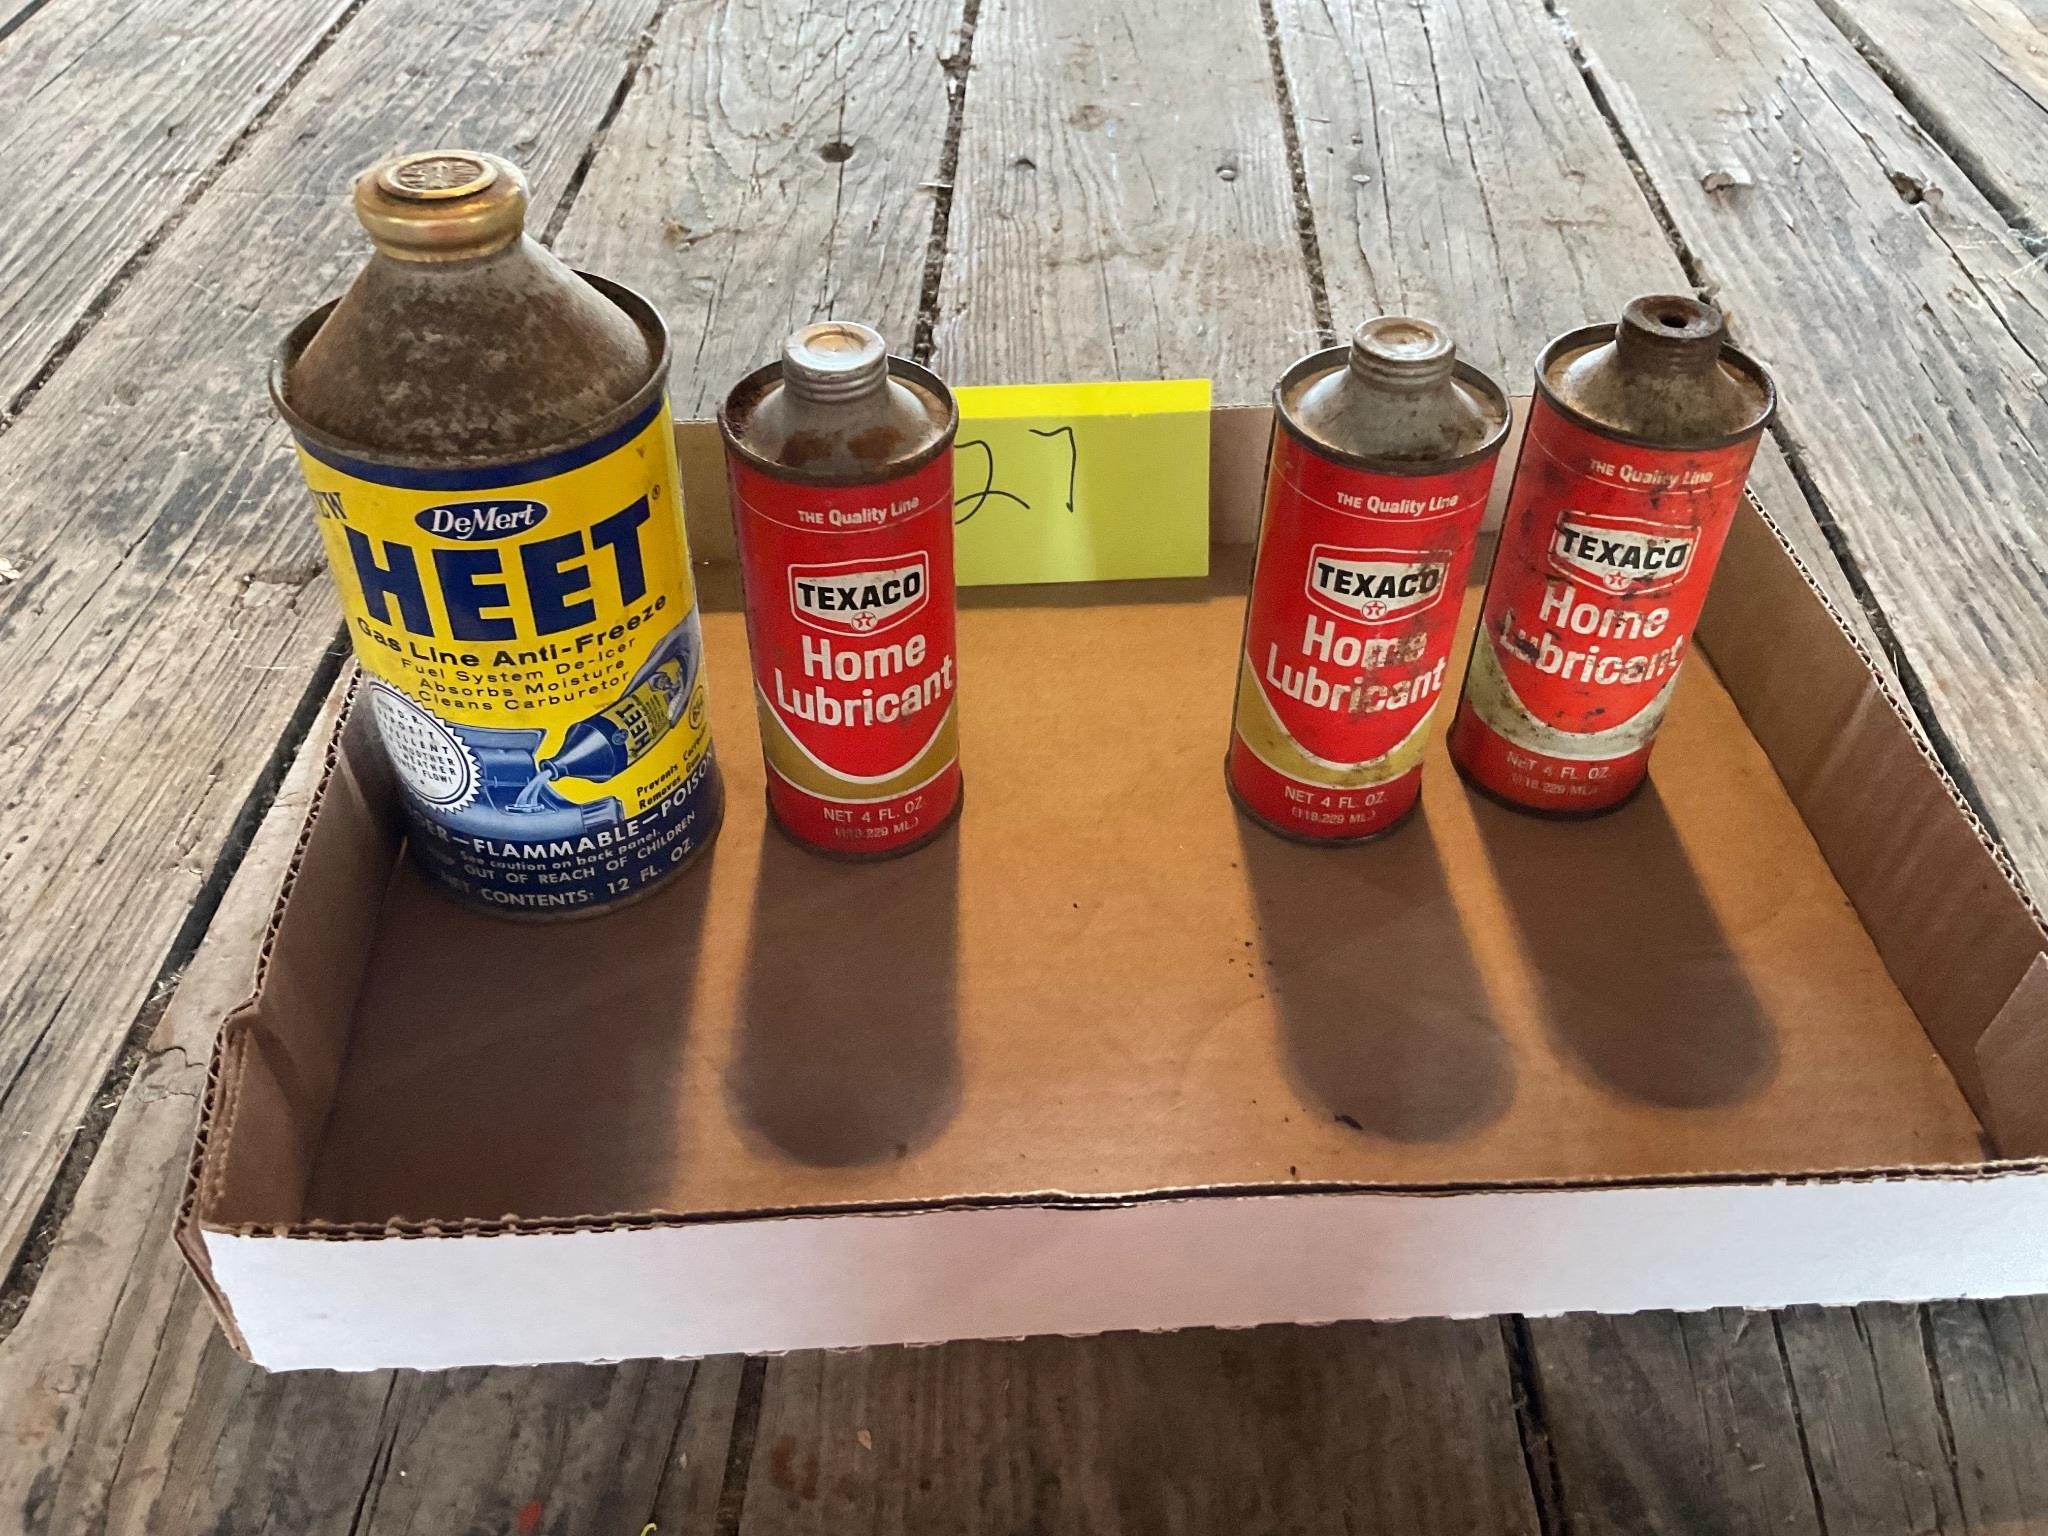 Vintage Texaco household oil cans and heat can